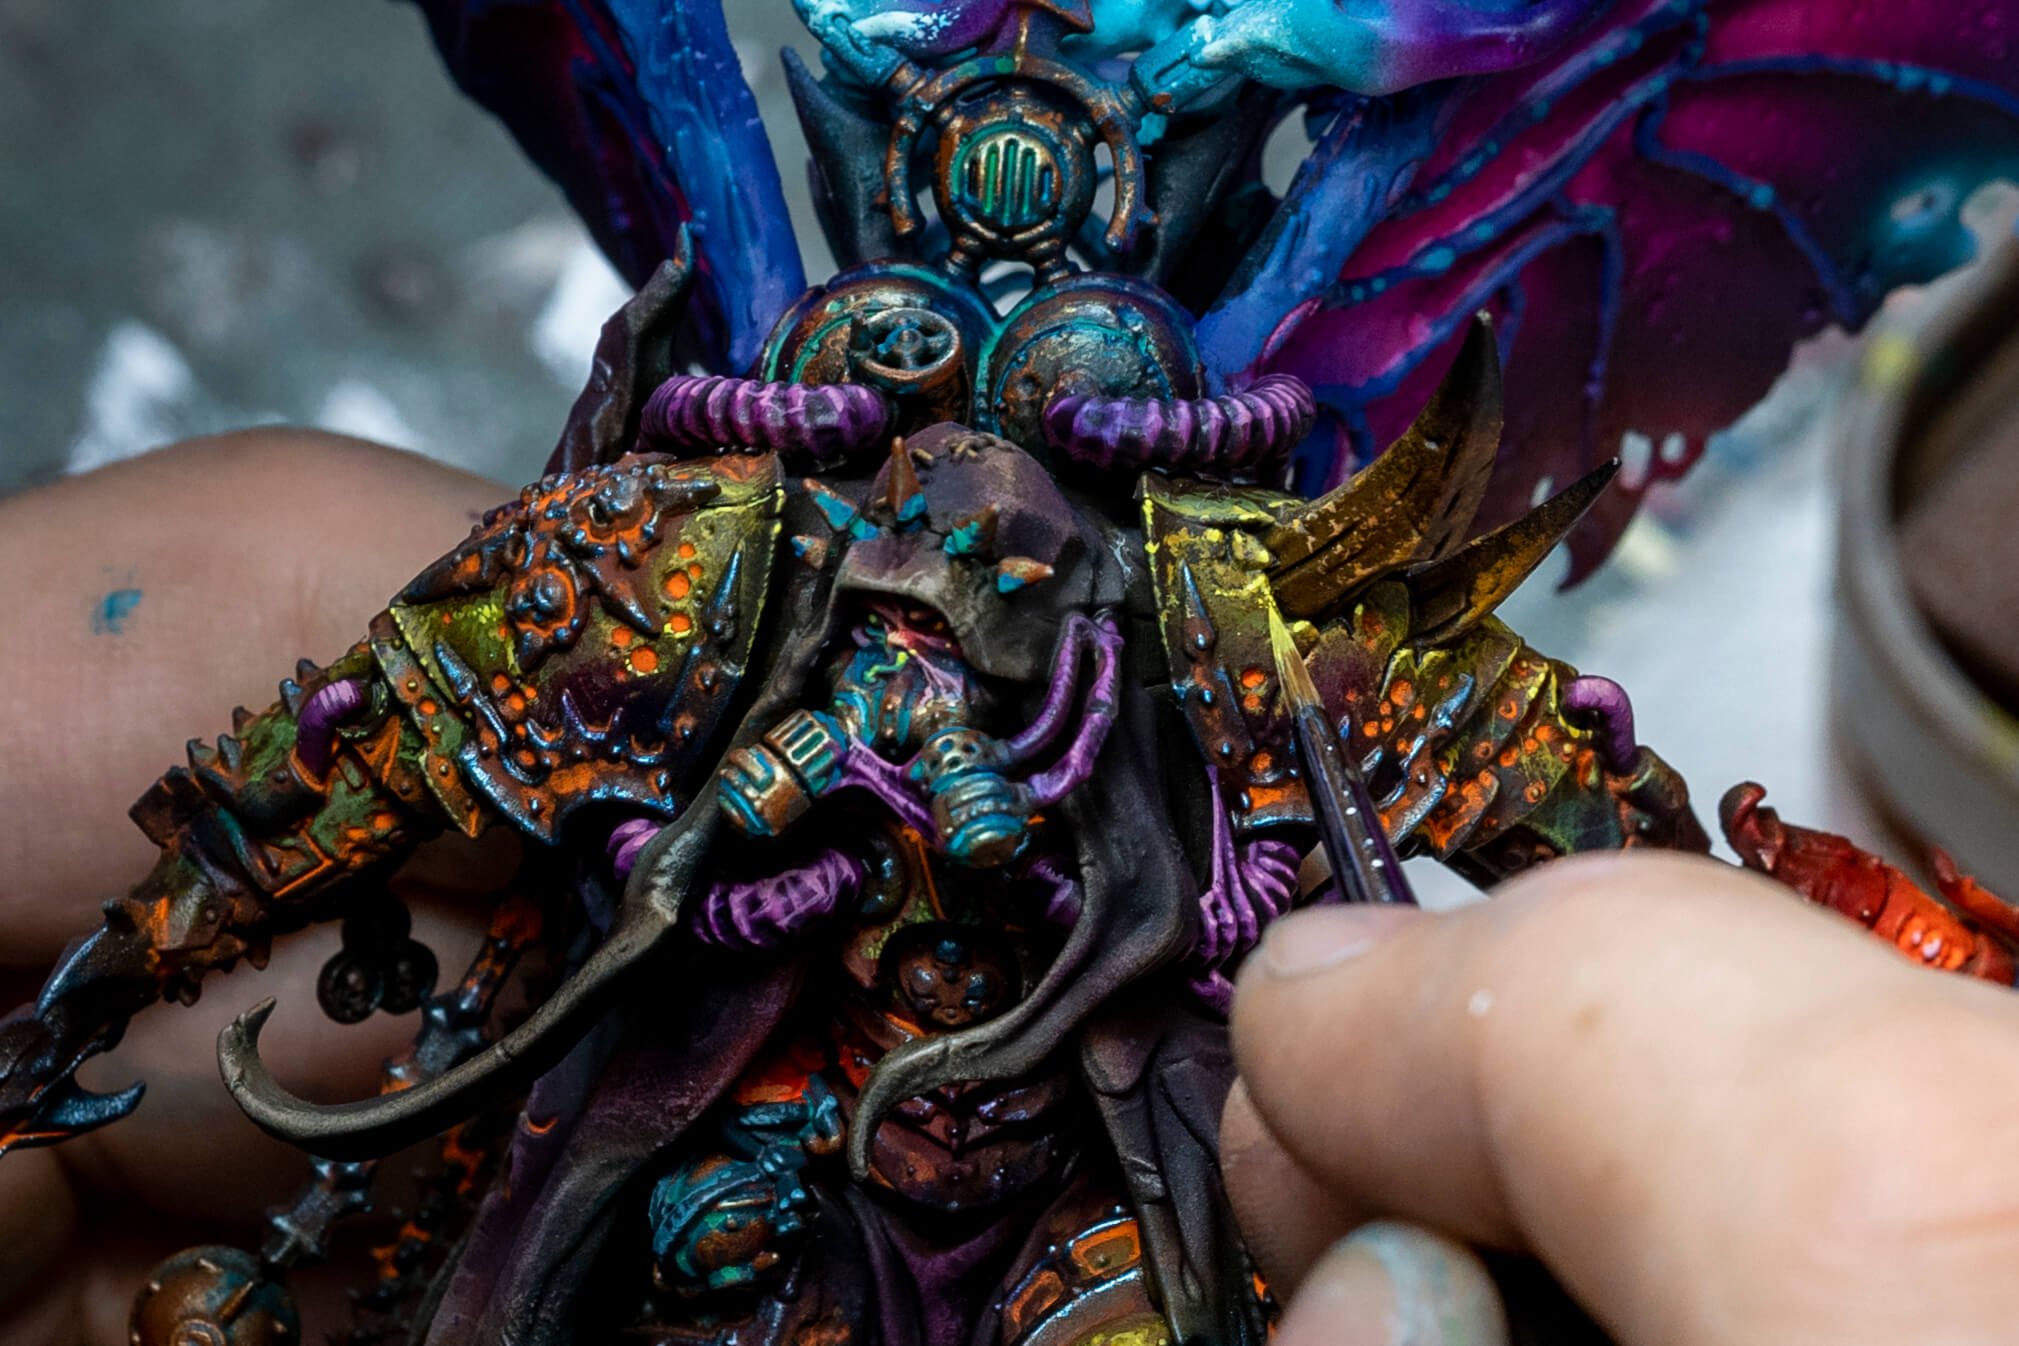 How to paint Warhammer miniatures: Beginner's Guide